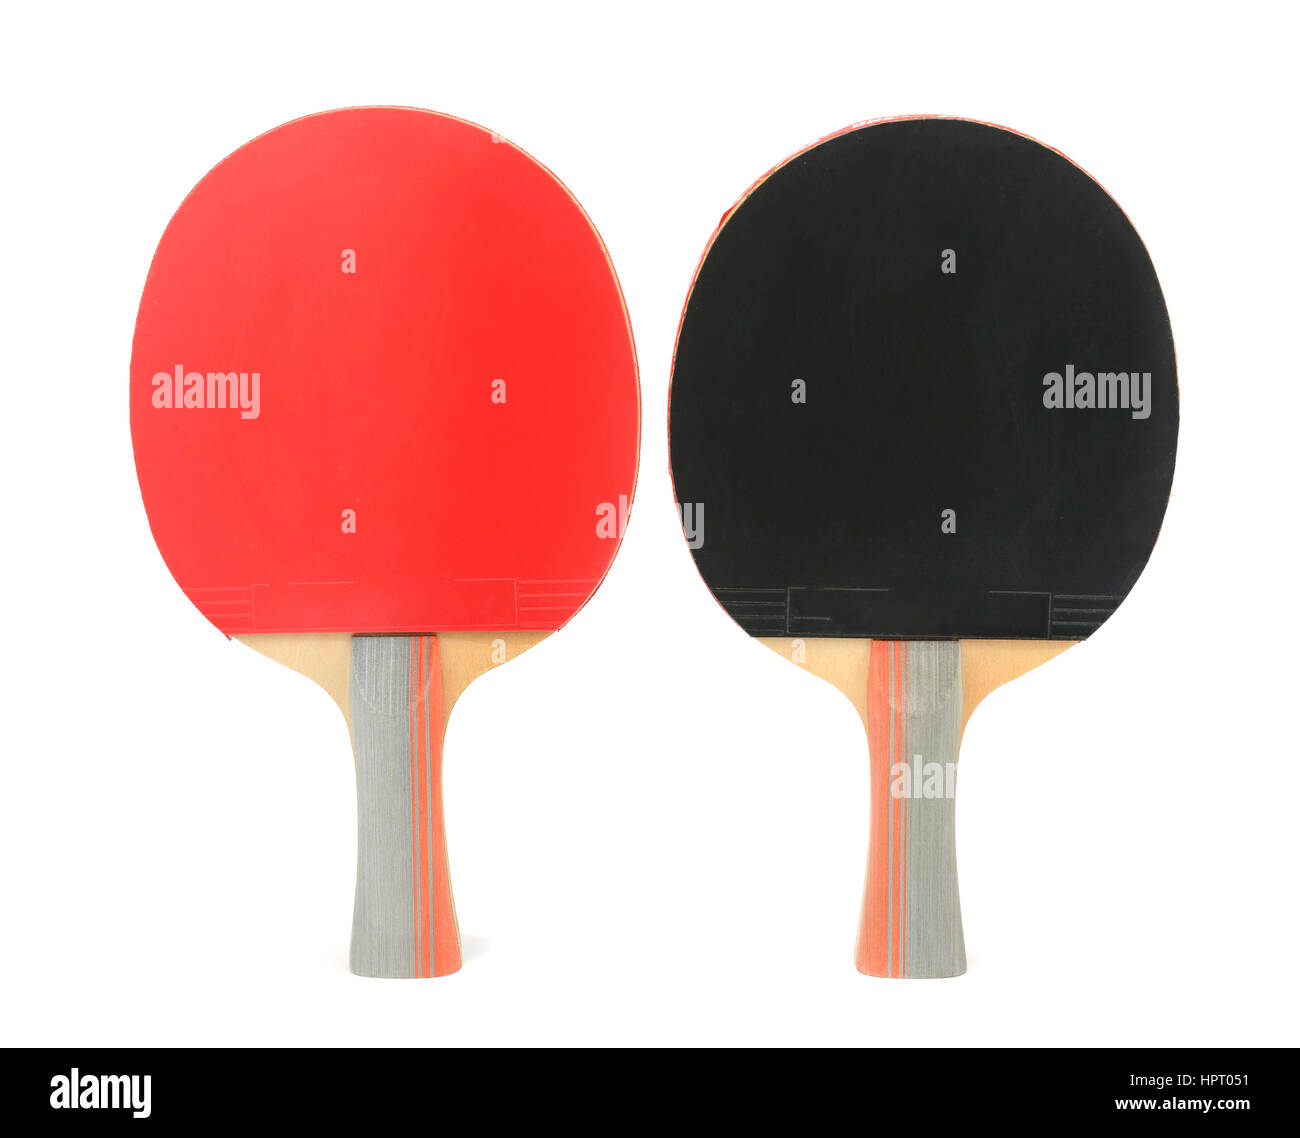 table tennis rackets isolated on white background Stock Photo